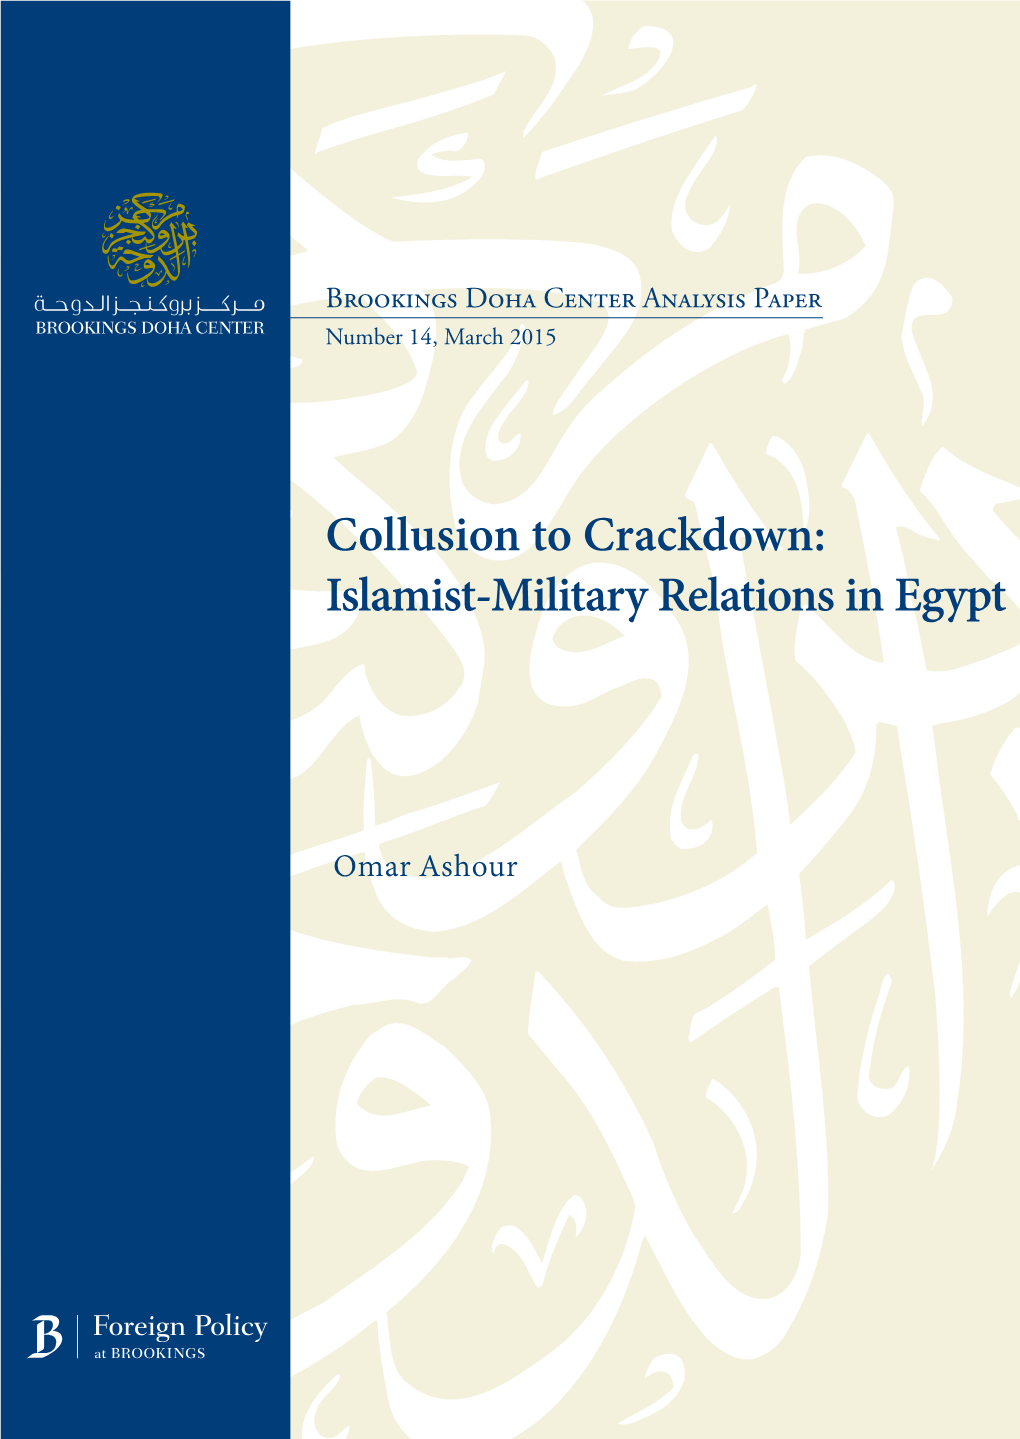 Collusion to Crackdown: Islamist-Military Relations in Egypt